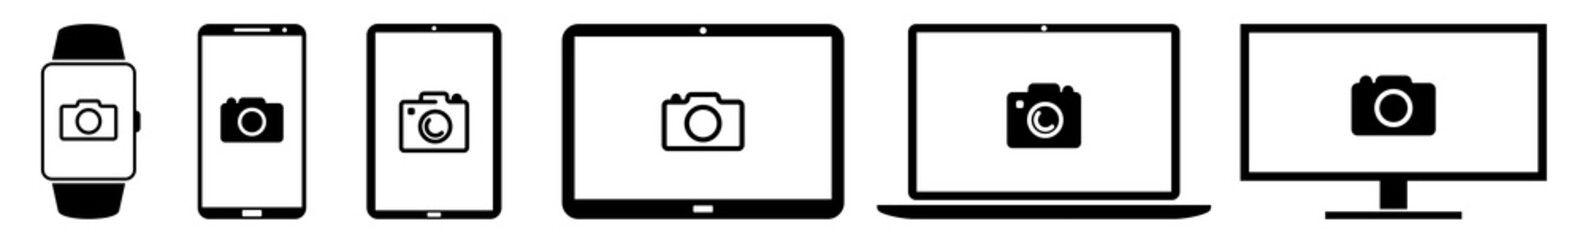 Display Camera, Cameras, Photo, Photography Icon Devices Set | Web Screen Photographer Device Online | Laptop Vector Illustration | Mobile Phone | PC Computer Smartphone Tablet Sign Isolated